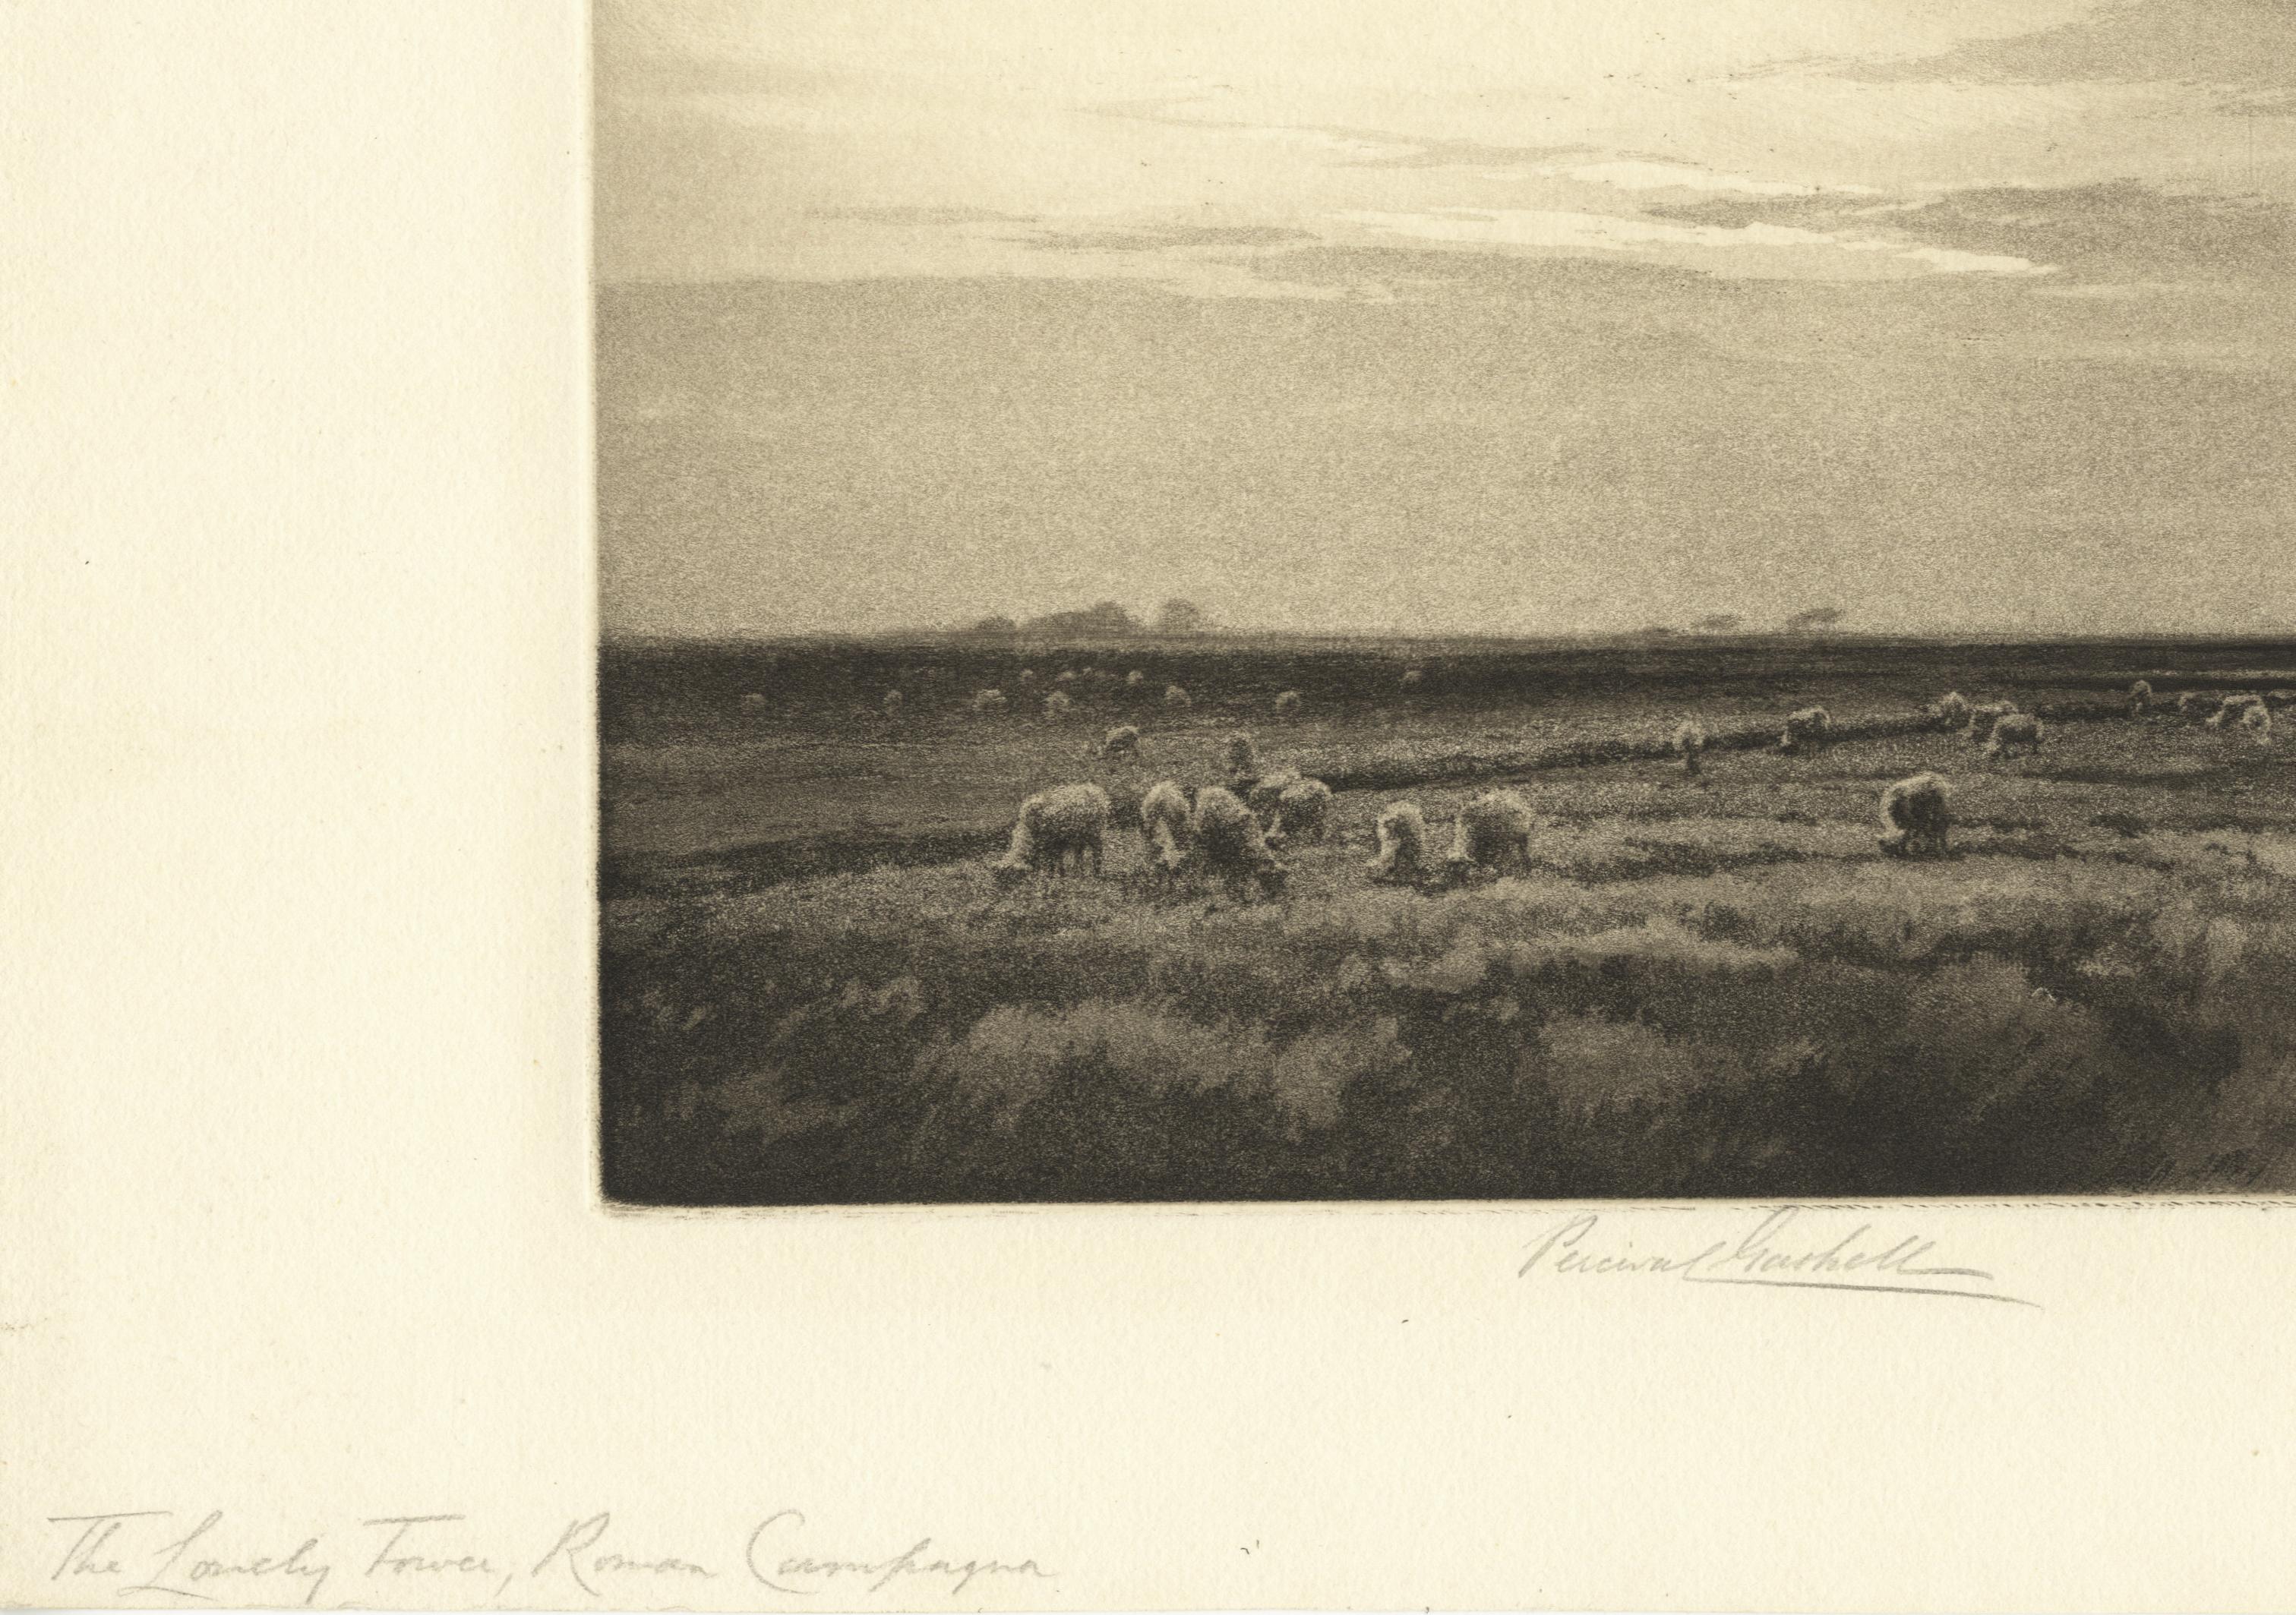 This is a fine aquatint etching by British artist Percival Gaskell.  The title is: The Lonely Tower, Roman Campagna, it was created and printed in 1924 in an edition of 150.  The image measures 10X14 1/4 inches, hand signed lower border in pencil.  